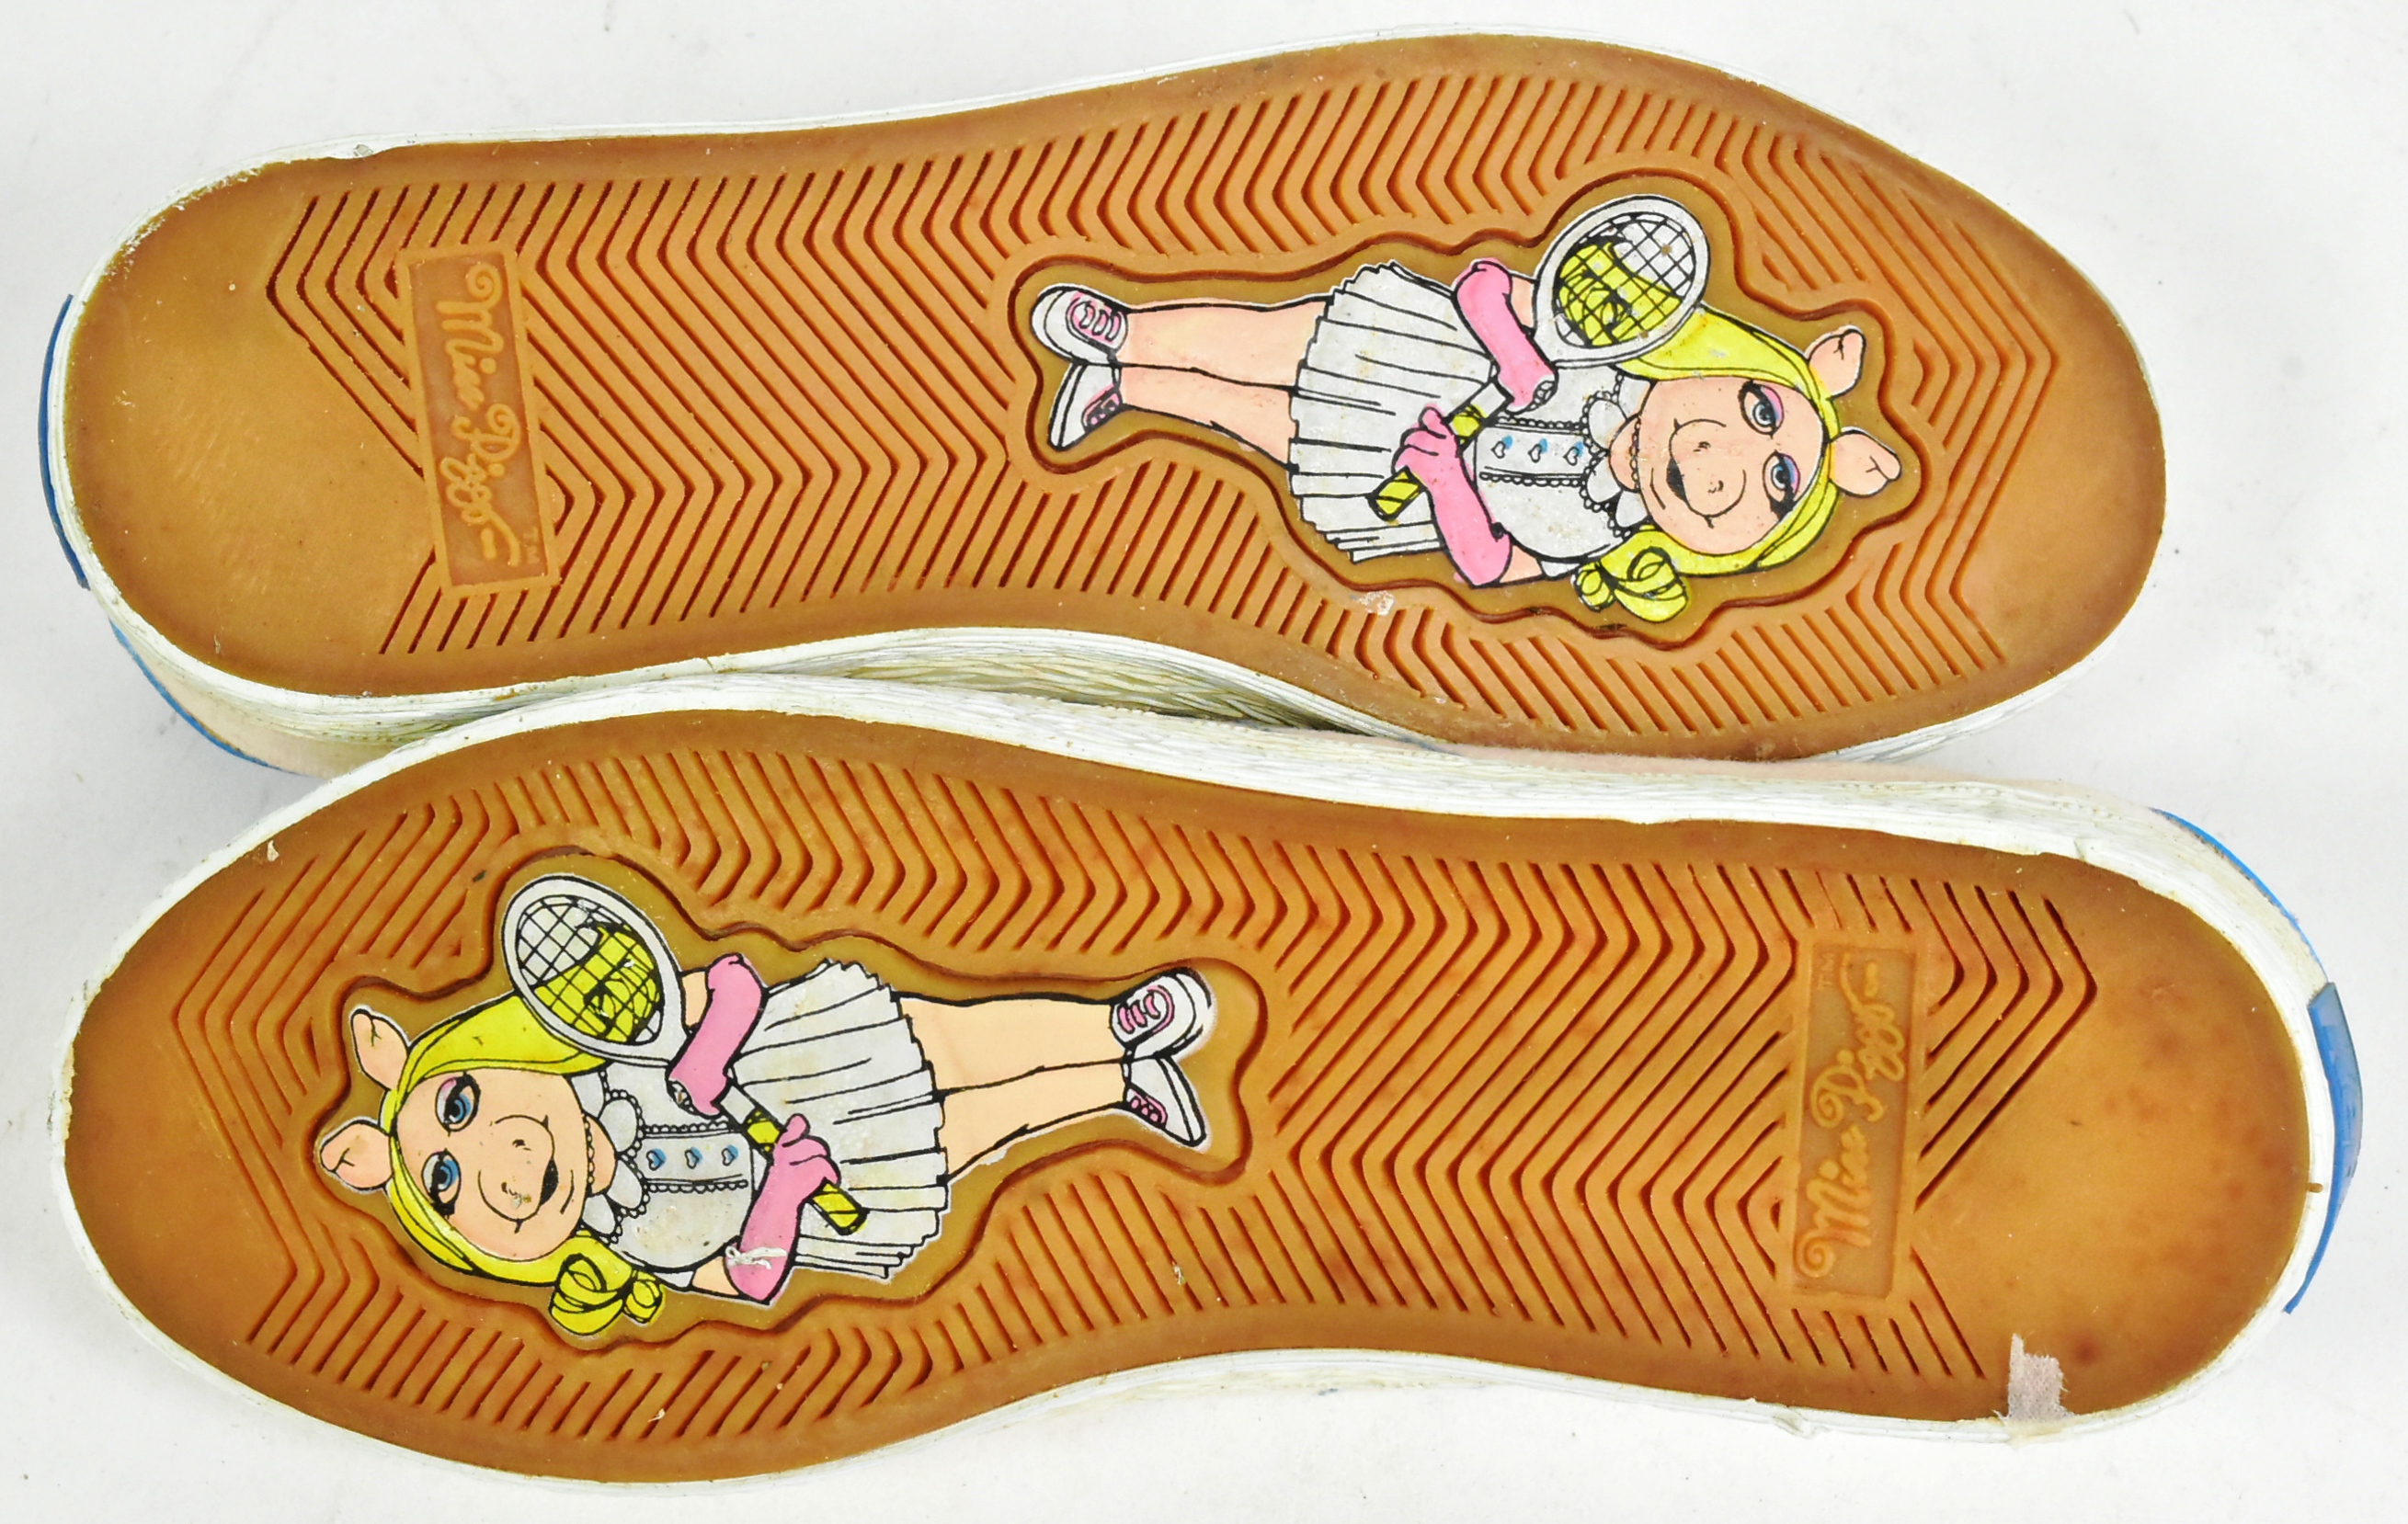 THE MUPPETS - VINTAGE KEDS SHOES - MISS PIGGY - Image 5 of 5